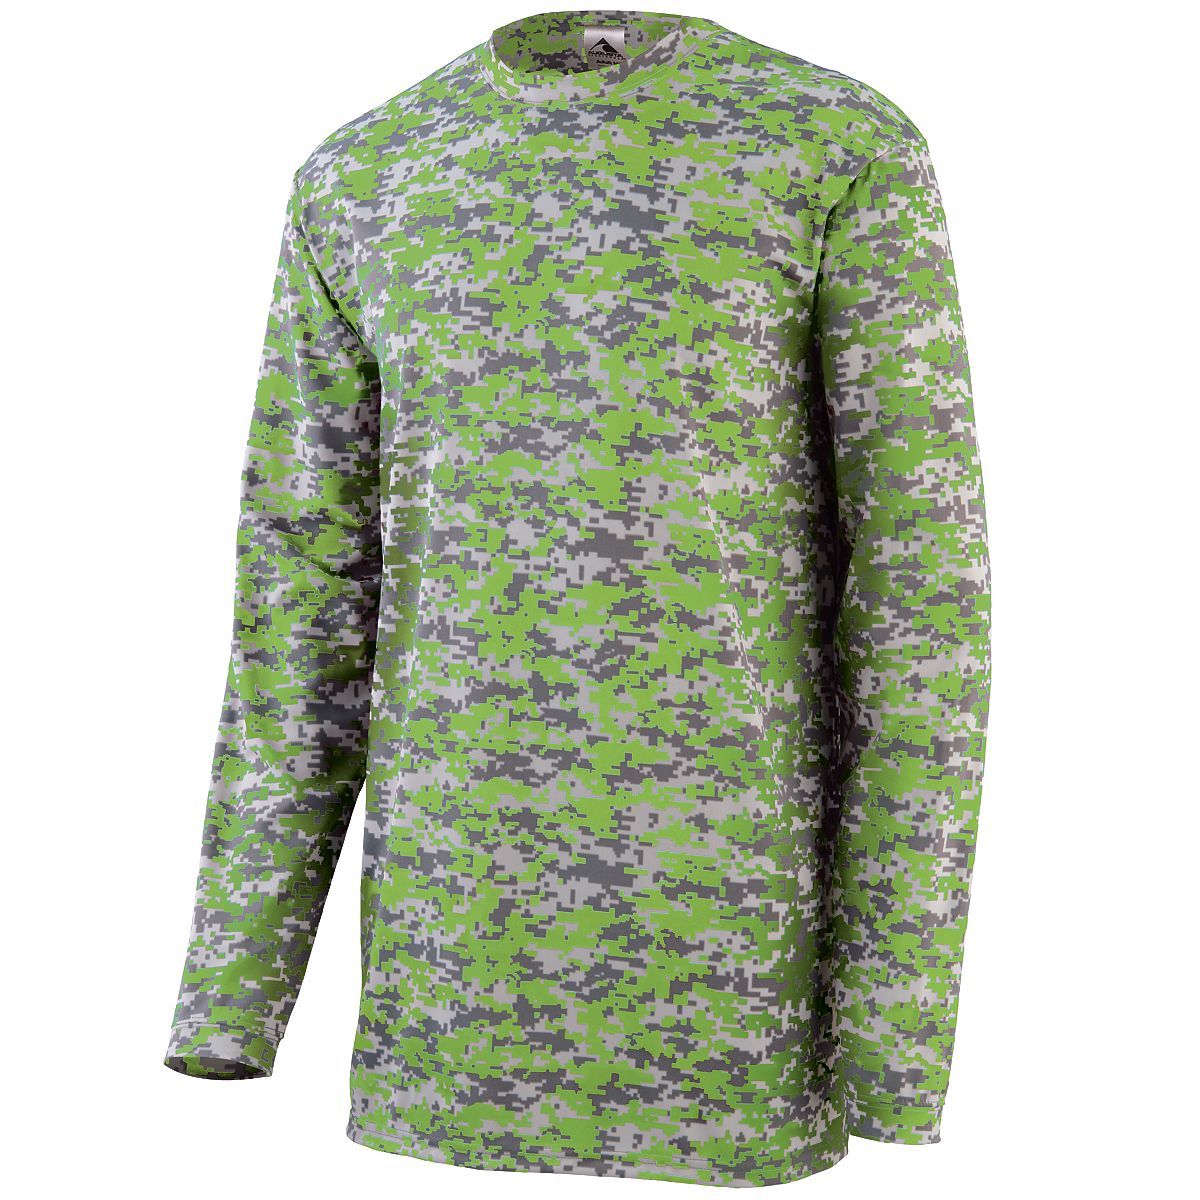 Augusta Sportswear Digi Camo Wicking Long Sleeve T-Shirt in Lime Digi  -Part of the Adult, Adult-Tee-Shirt, T-Shirts, Augusta-Products, Shirts product lines at KanaleyCreations.com